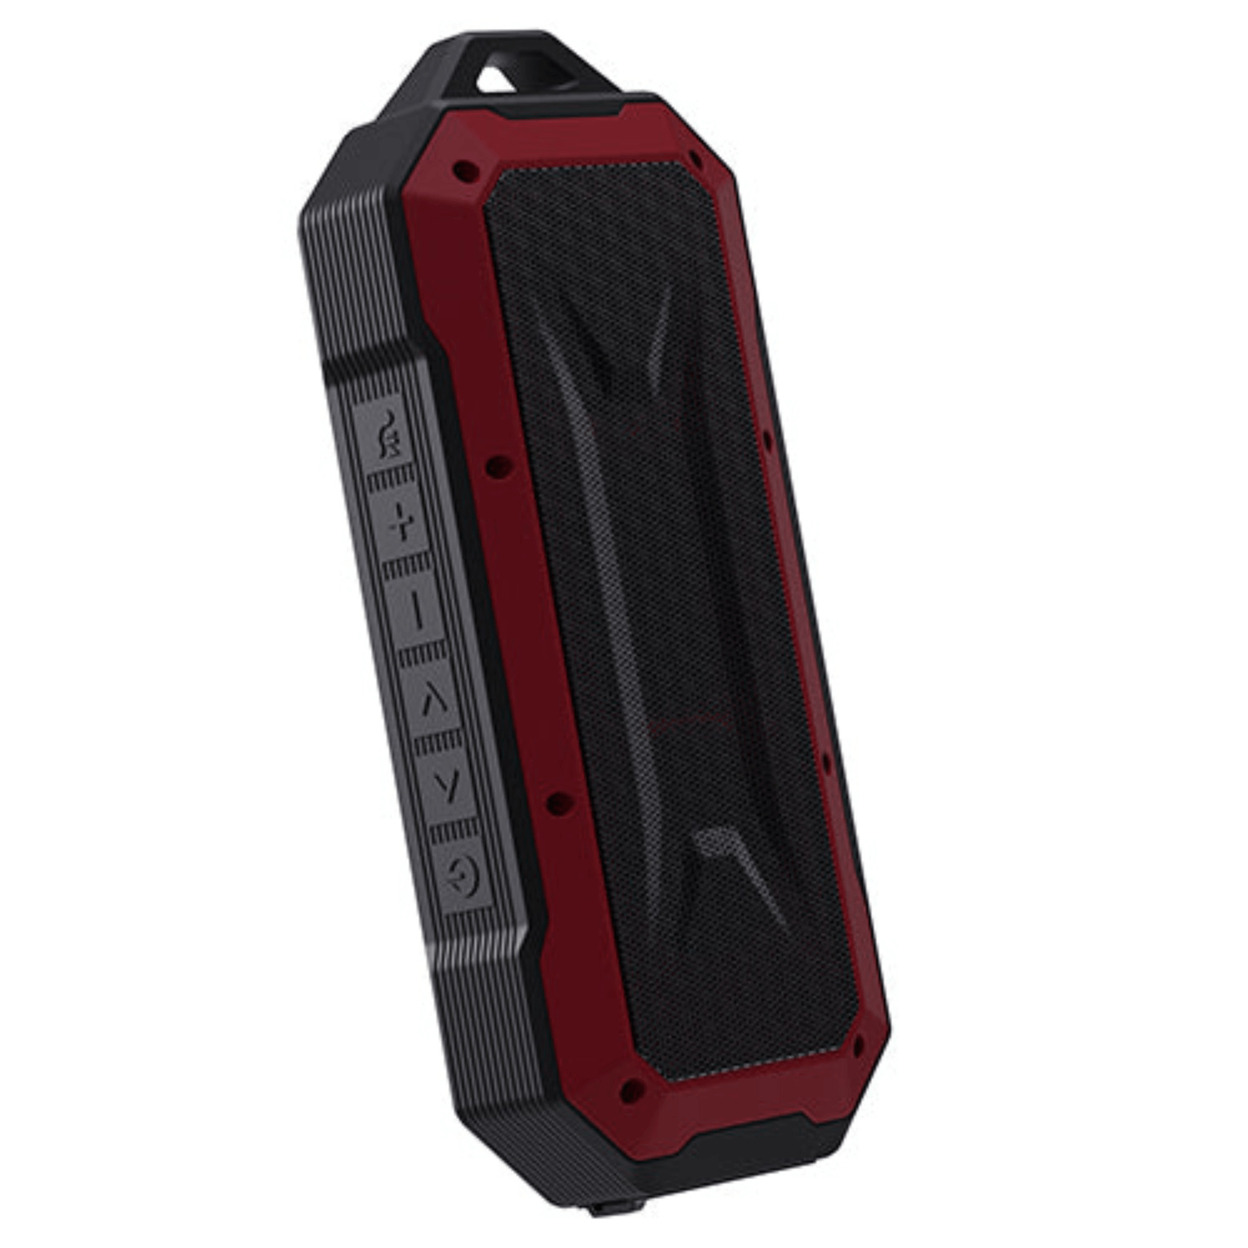 Duro Water-Resistant Portable Bluetooth Speaker, Shockproof & FM (SC-1454IPX) - Red